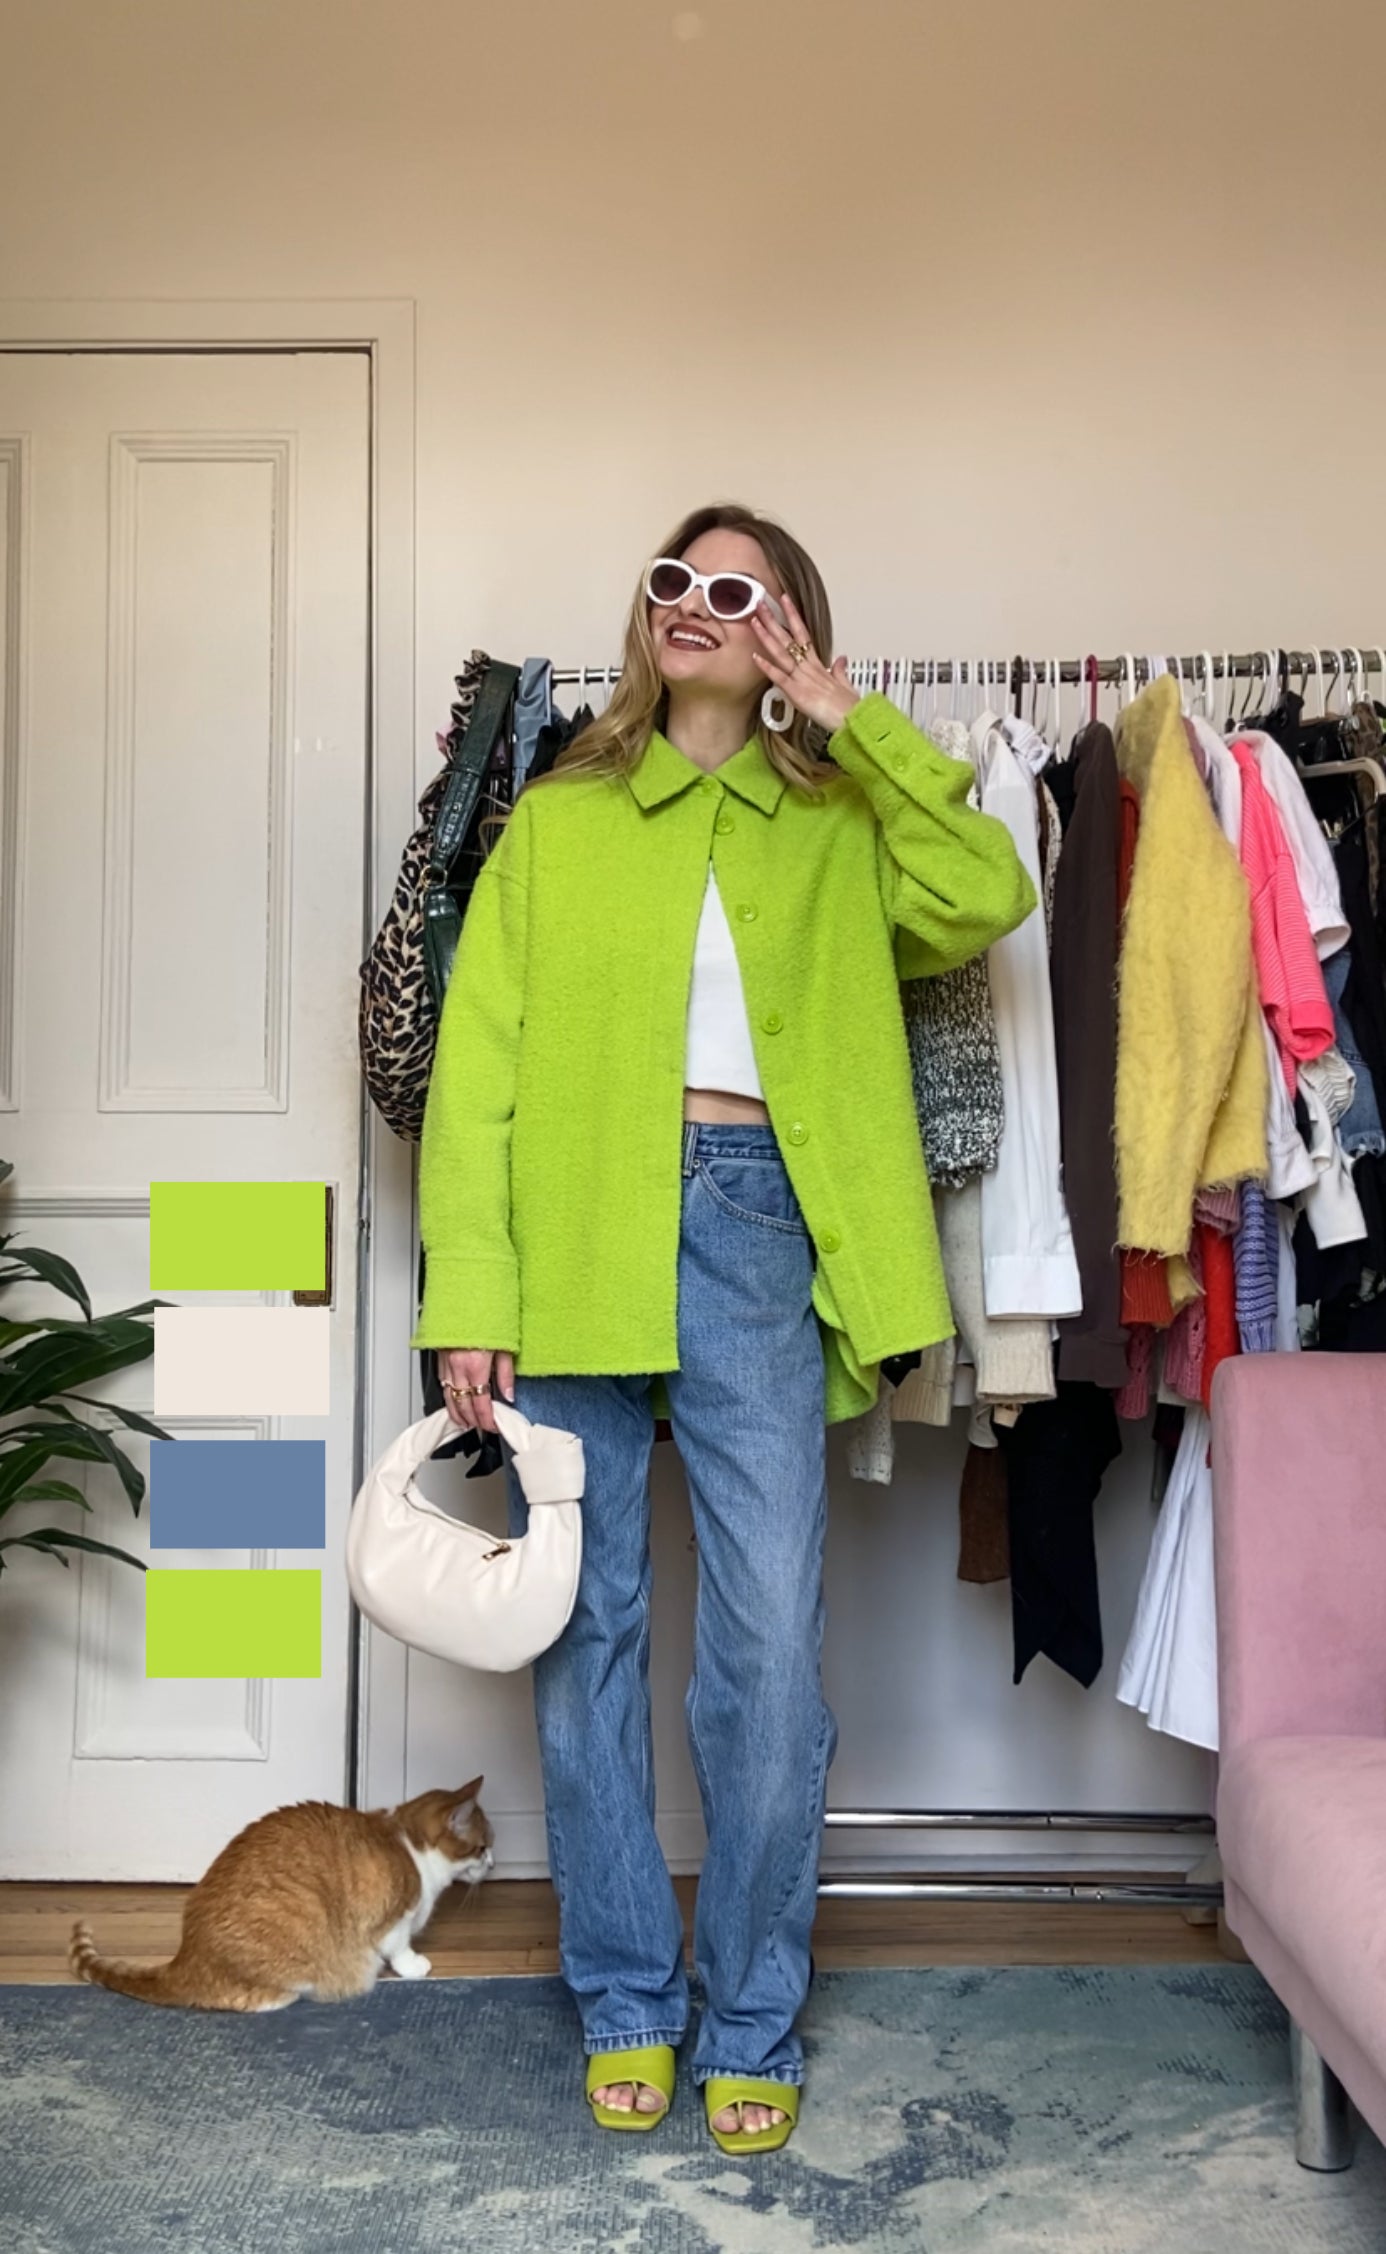 Woman in a bright green blazer and jeans with sunglasses, holding a white bag, standing by a rack of clothes with a cat nearby